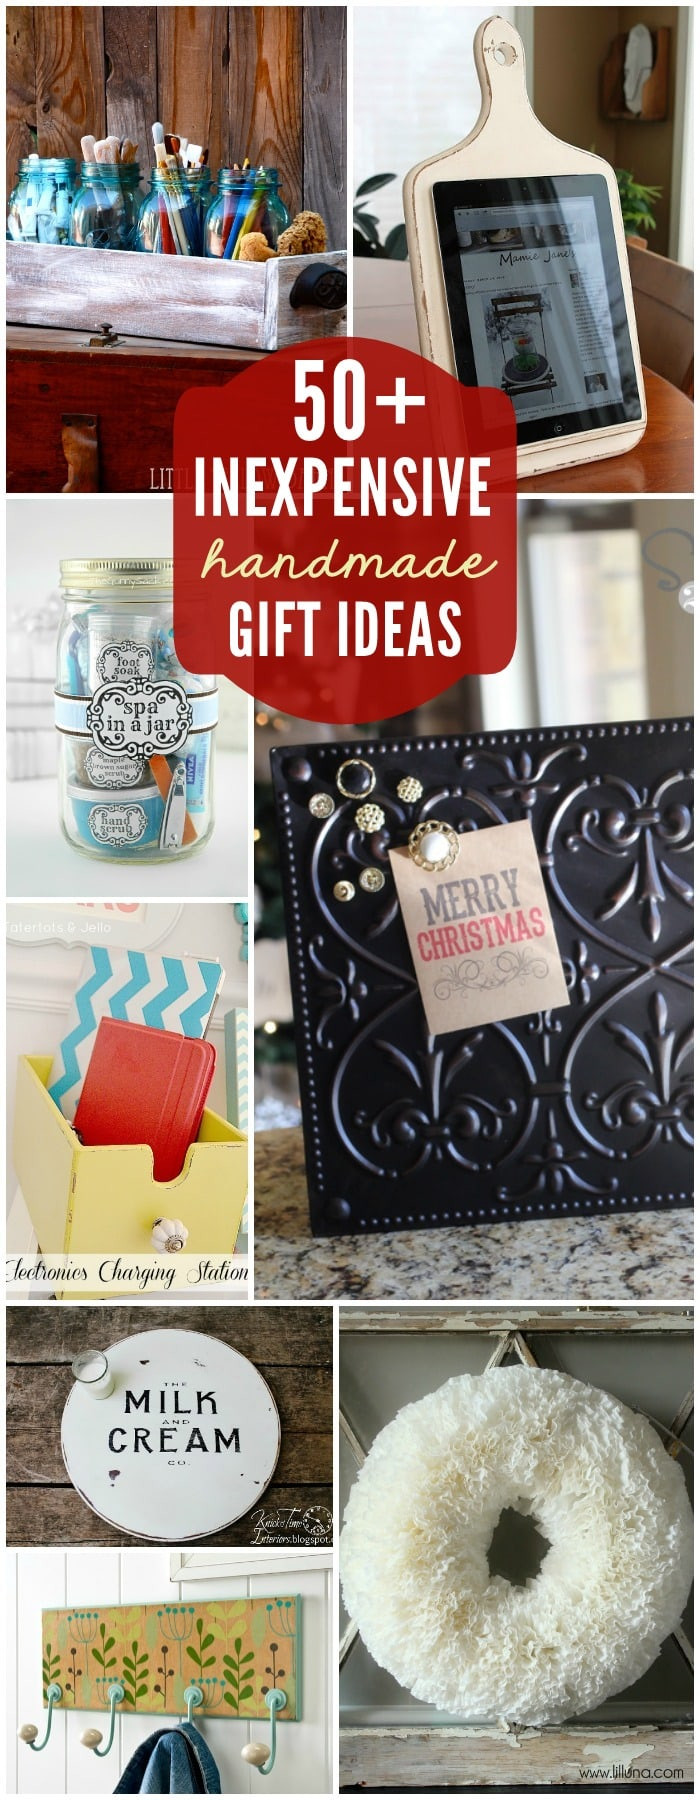 Homemade Holiday Gift Ideas
 Inexpensive Birthday Gift Ideas